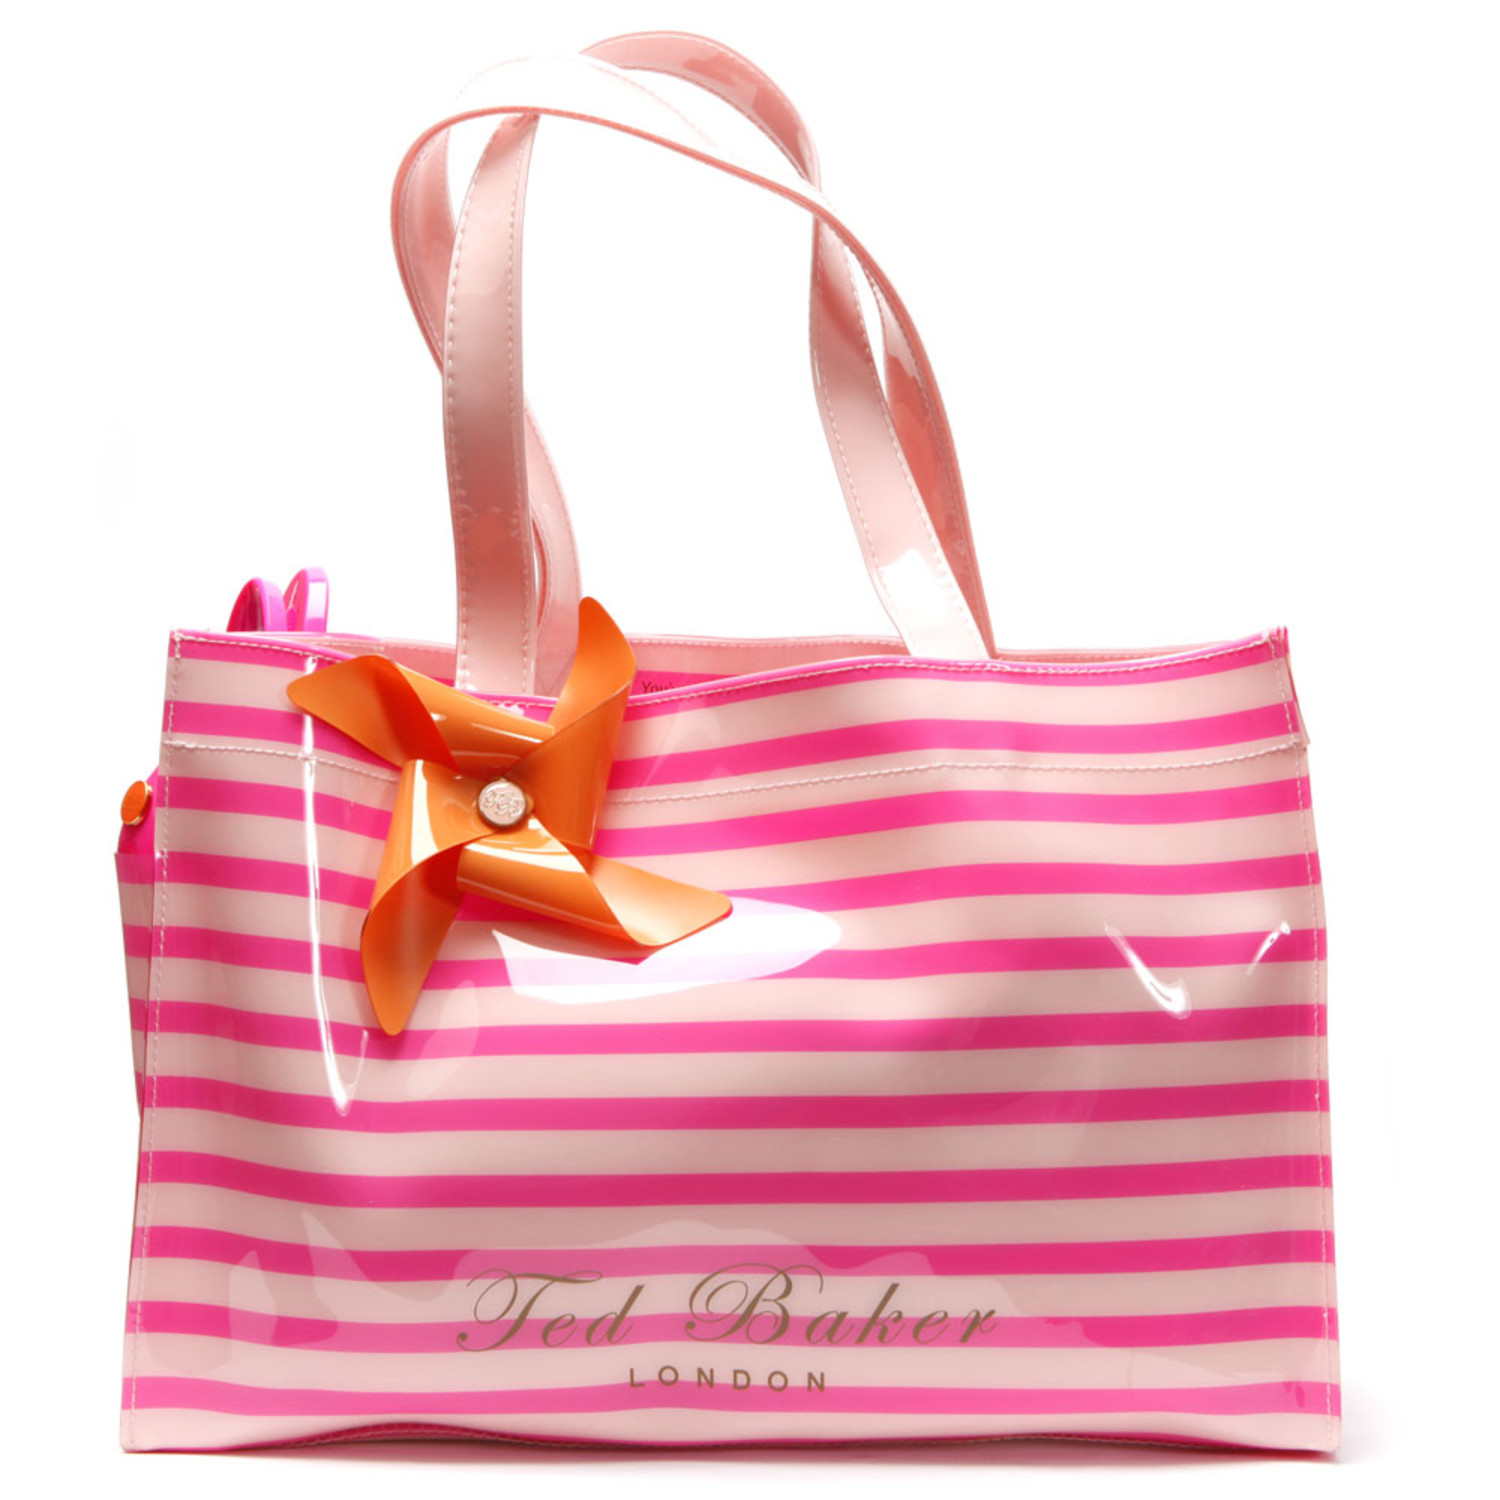 Ted Baker beach bags are fabulous and a worthwhile investment, Â£59